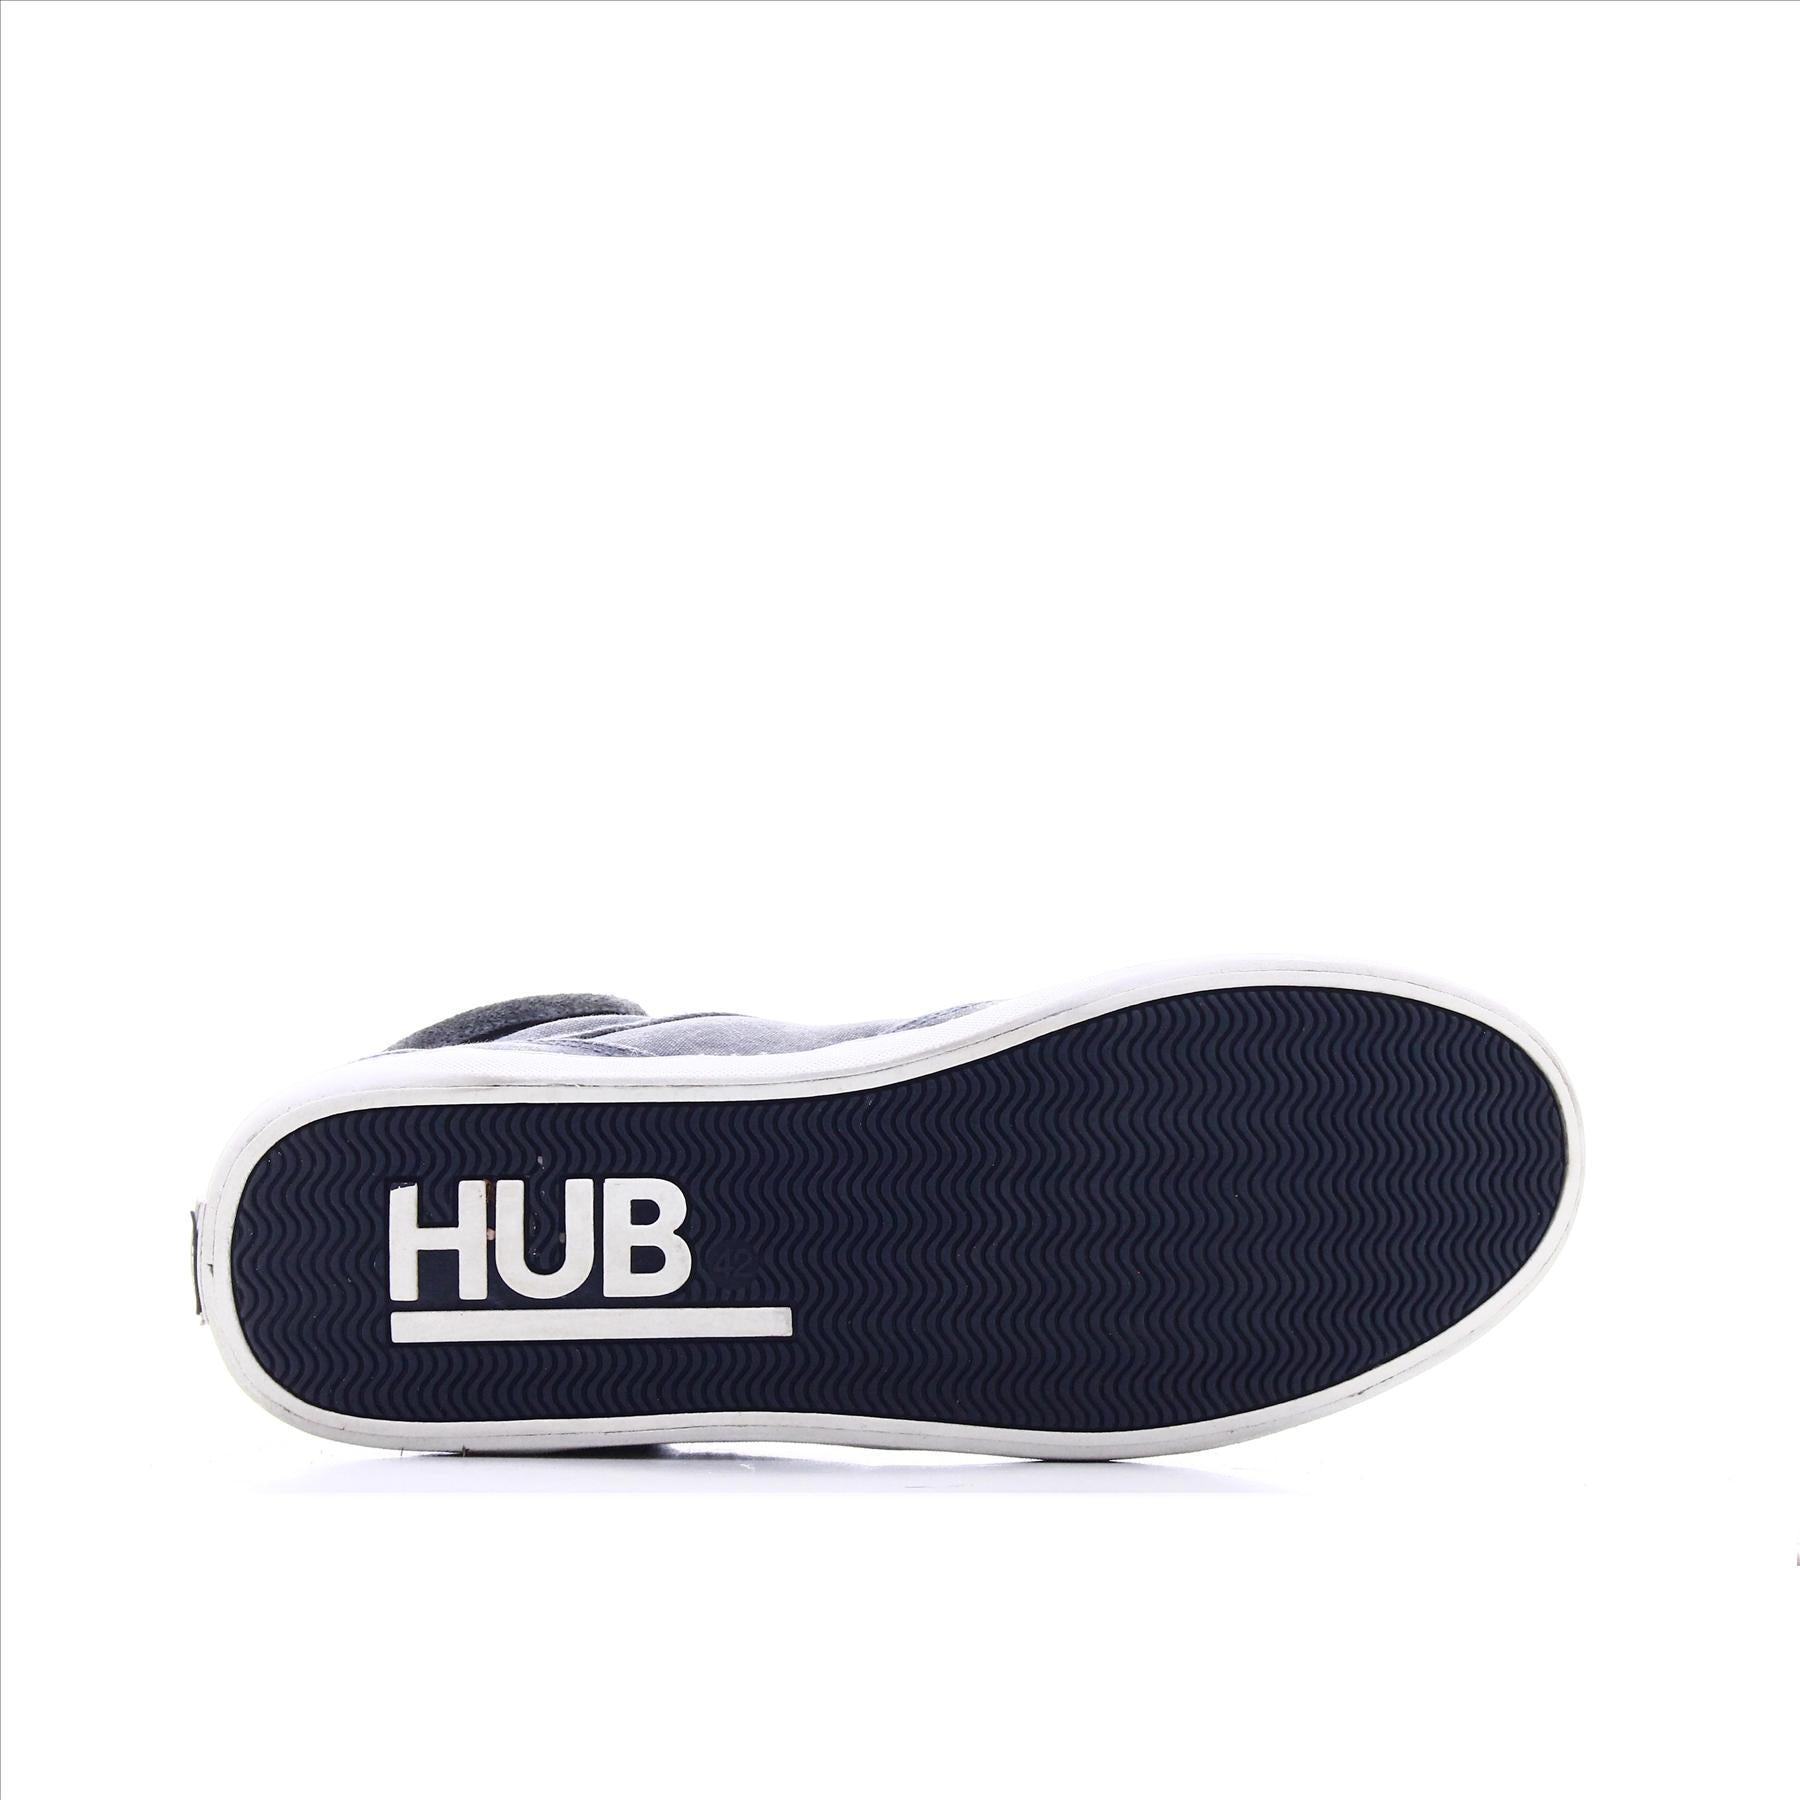 Hub Sports and Casual